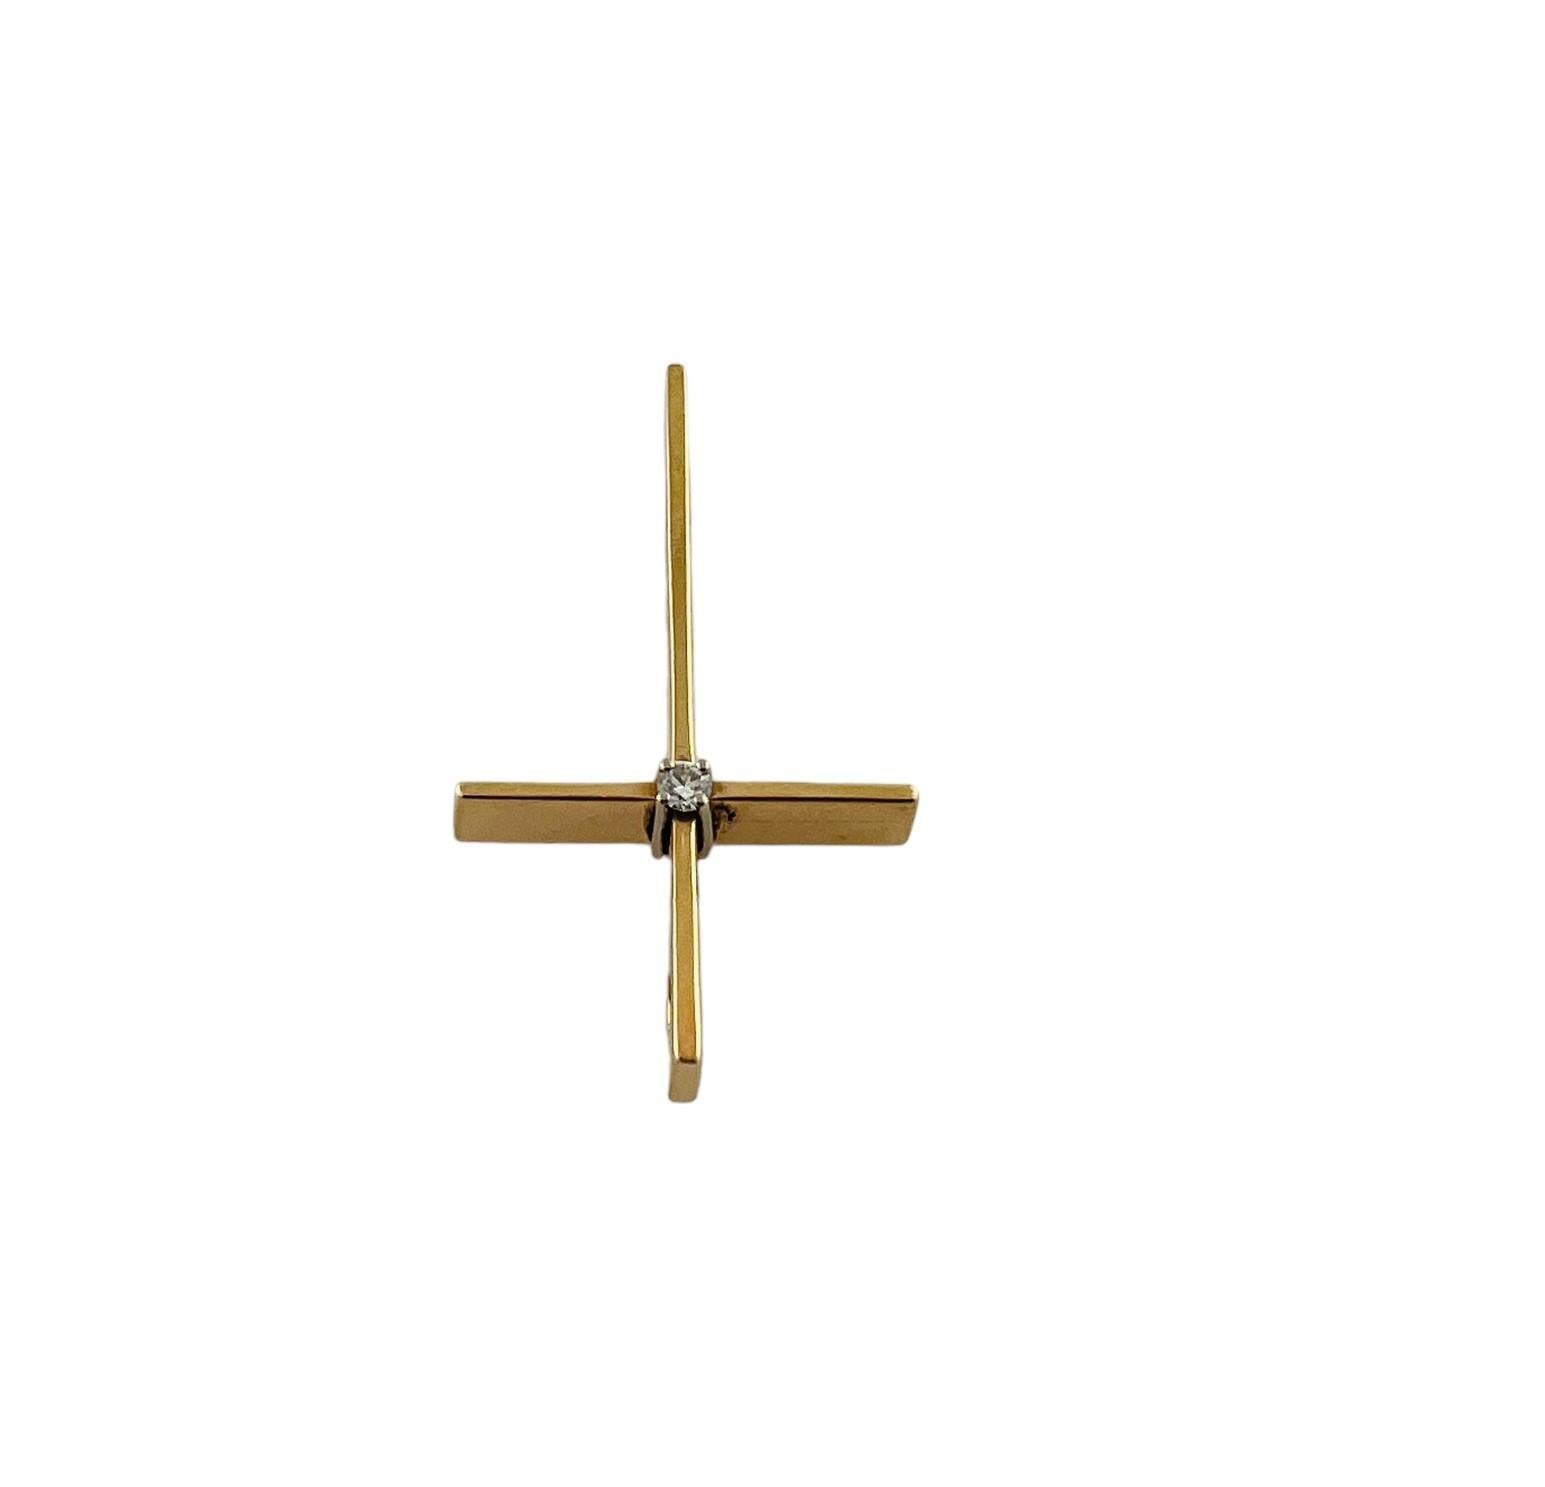 14K Yellow Gold Diamond Cross Pendant

This cross pendant is set in 14K yellow gold with a single round brilliant diamond in its center

Diamond is approx. .03 cts and of VS2 clarity and G color

Pendant  measures approx. 1 1/4